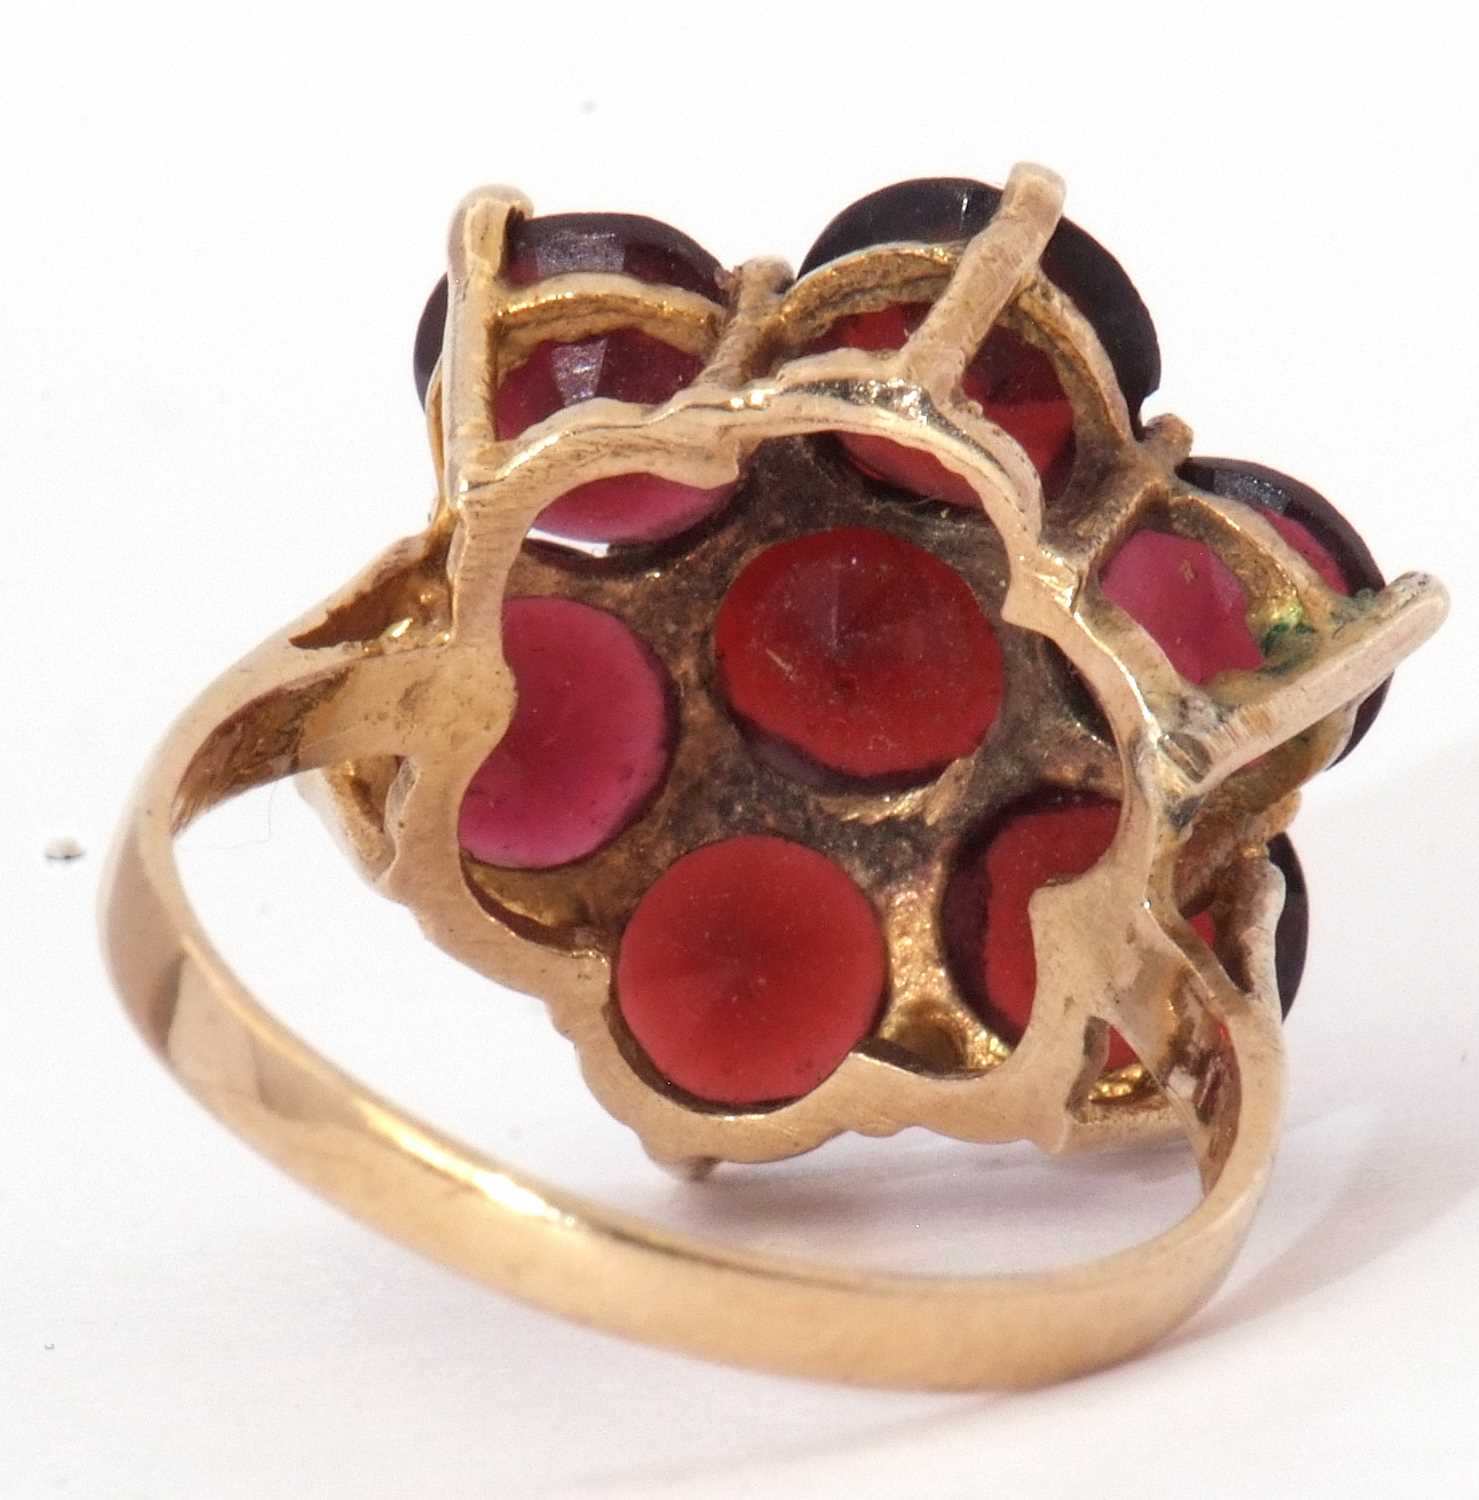 9ct gold large garnet cluster ring featuring seven round garnets, head size 18mm diameter, all in - Image 3 of 8